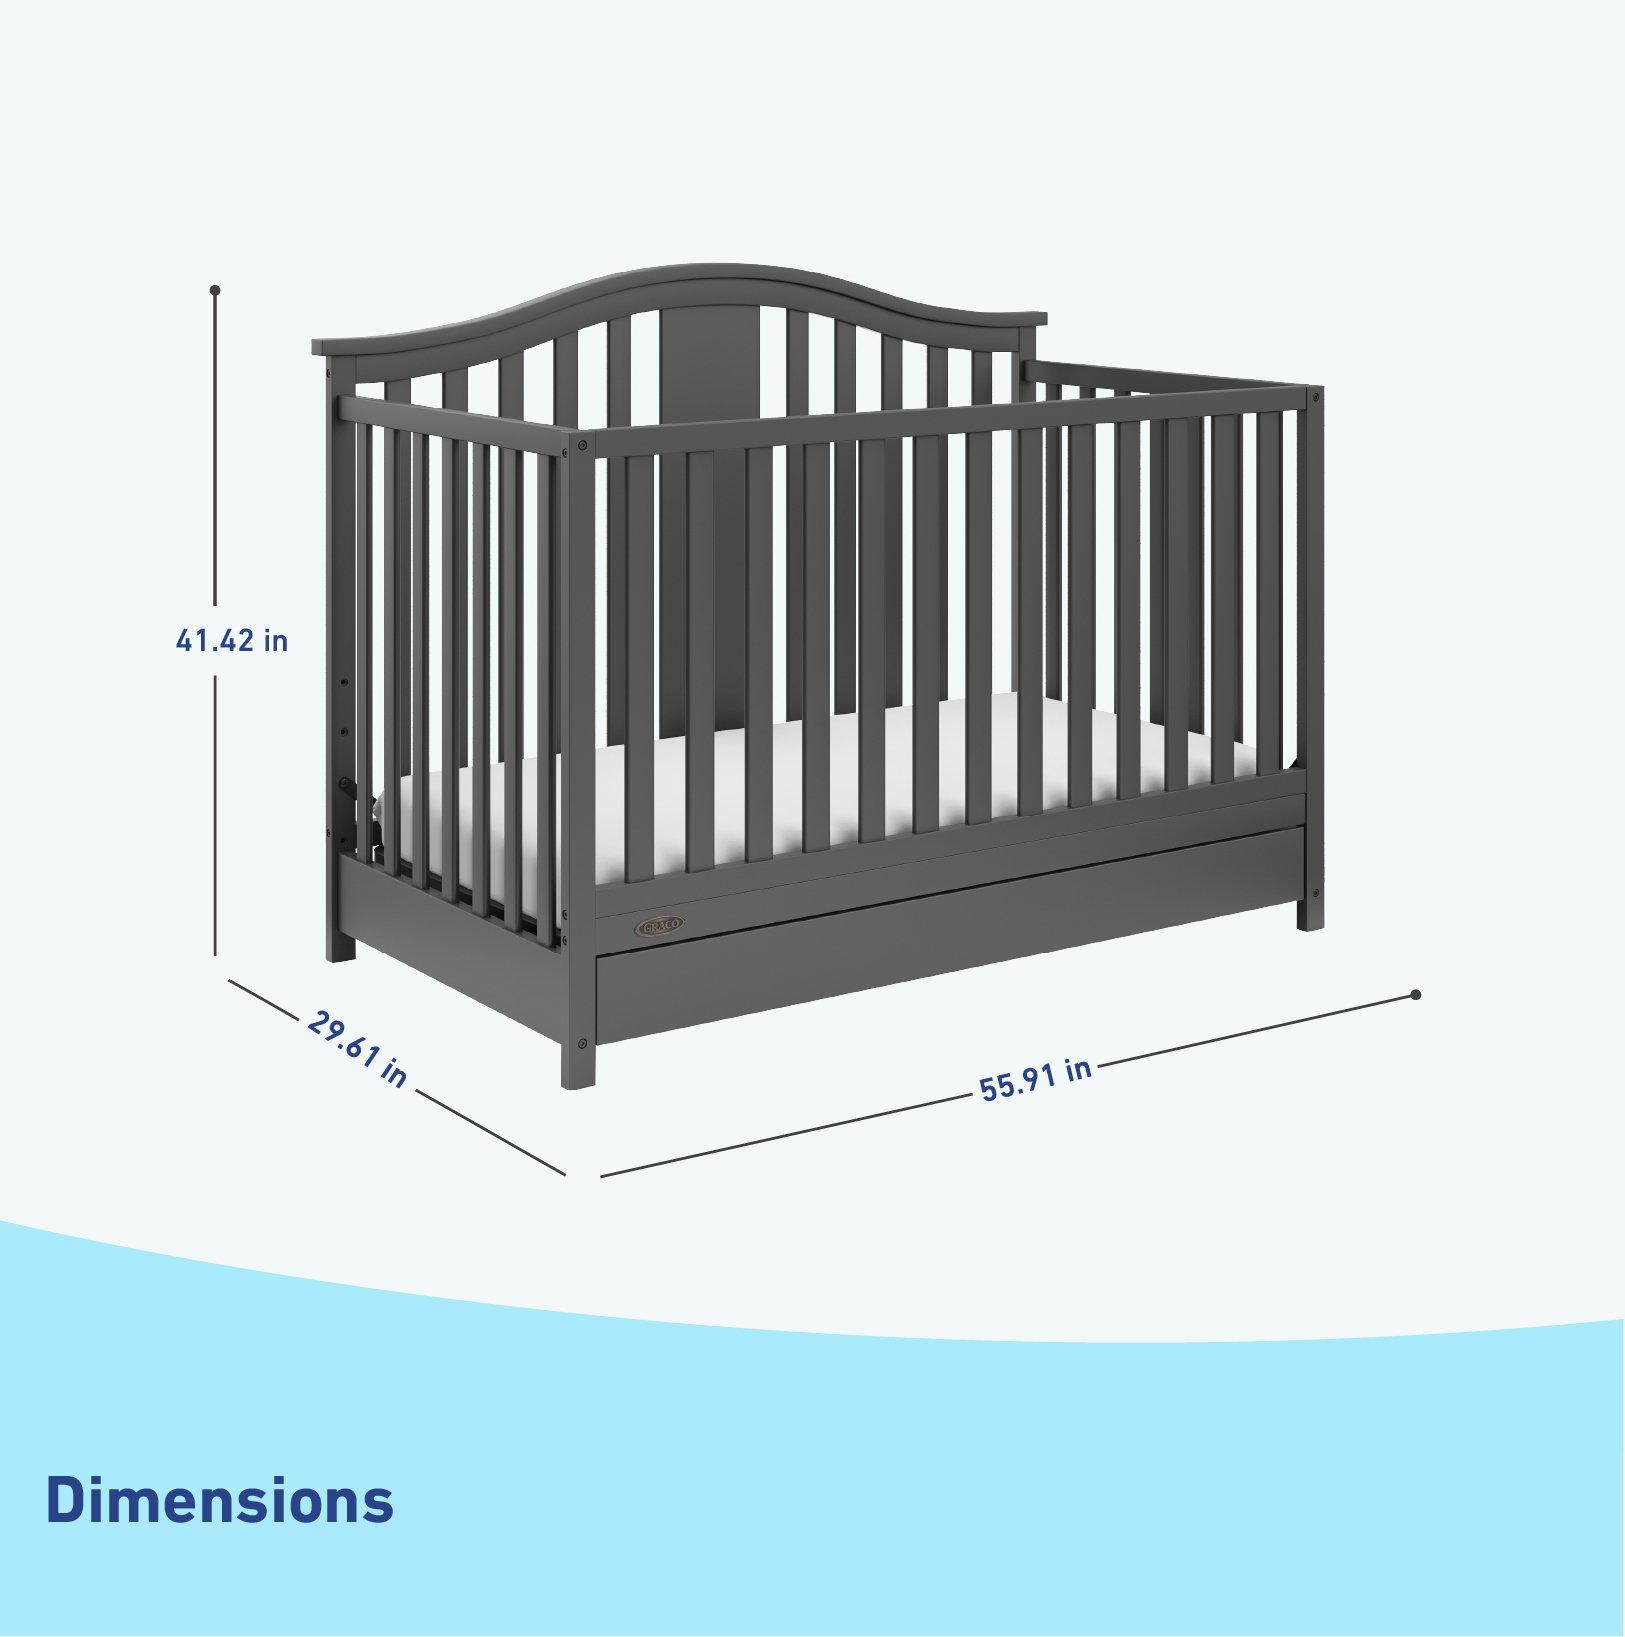 Mattress Not Included Converts to Toddler Bed Day Bed or Full Bed Gray Graco Solano 4-in-1 Convertible Crib & Changer with Drawer Fixed Side Crib Solid Pine & Wood Product Construction 